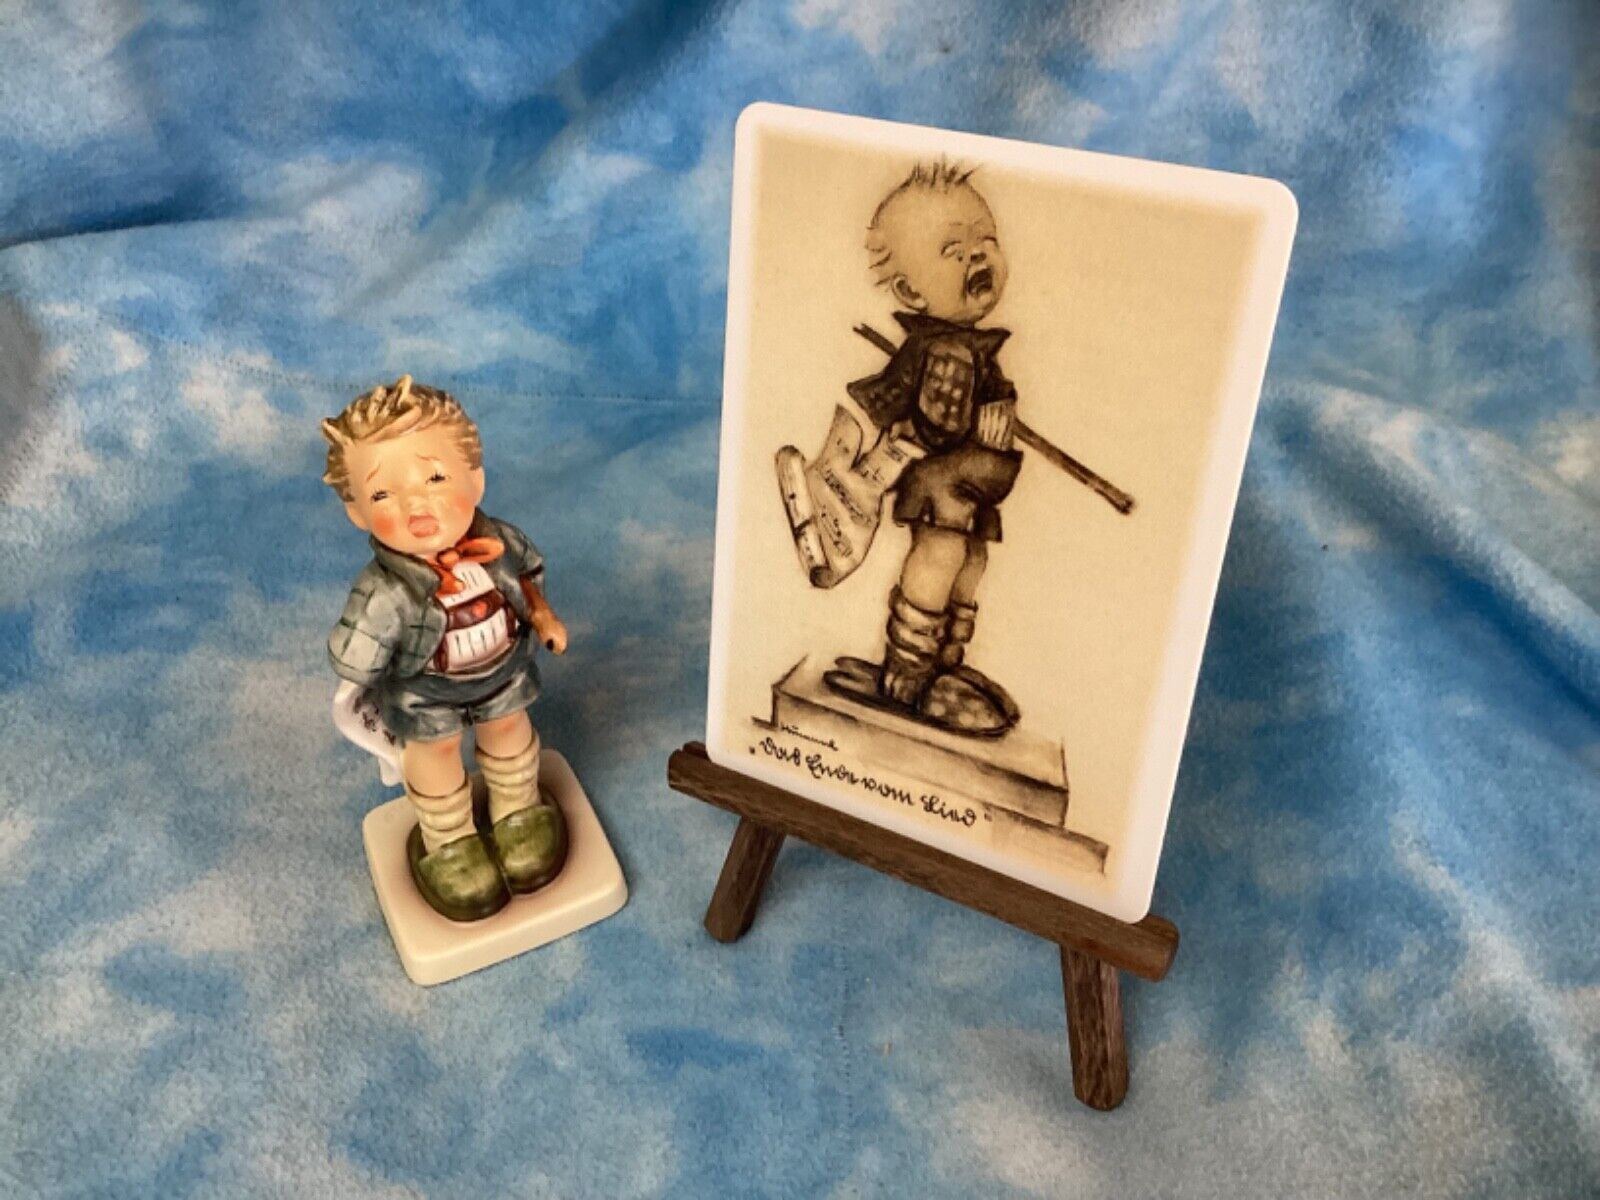 Hummel figurine Sad song with easel & ceramic post card MINT condition with box